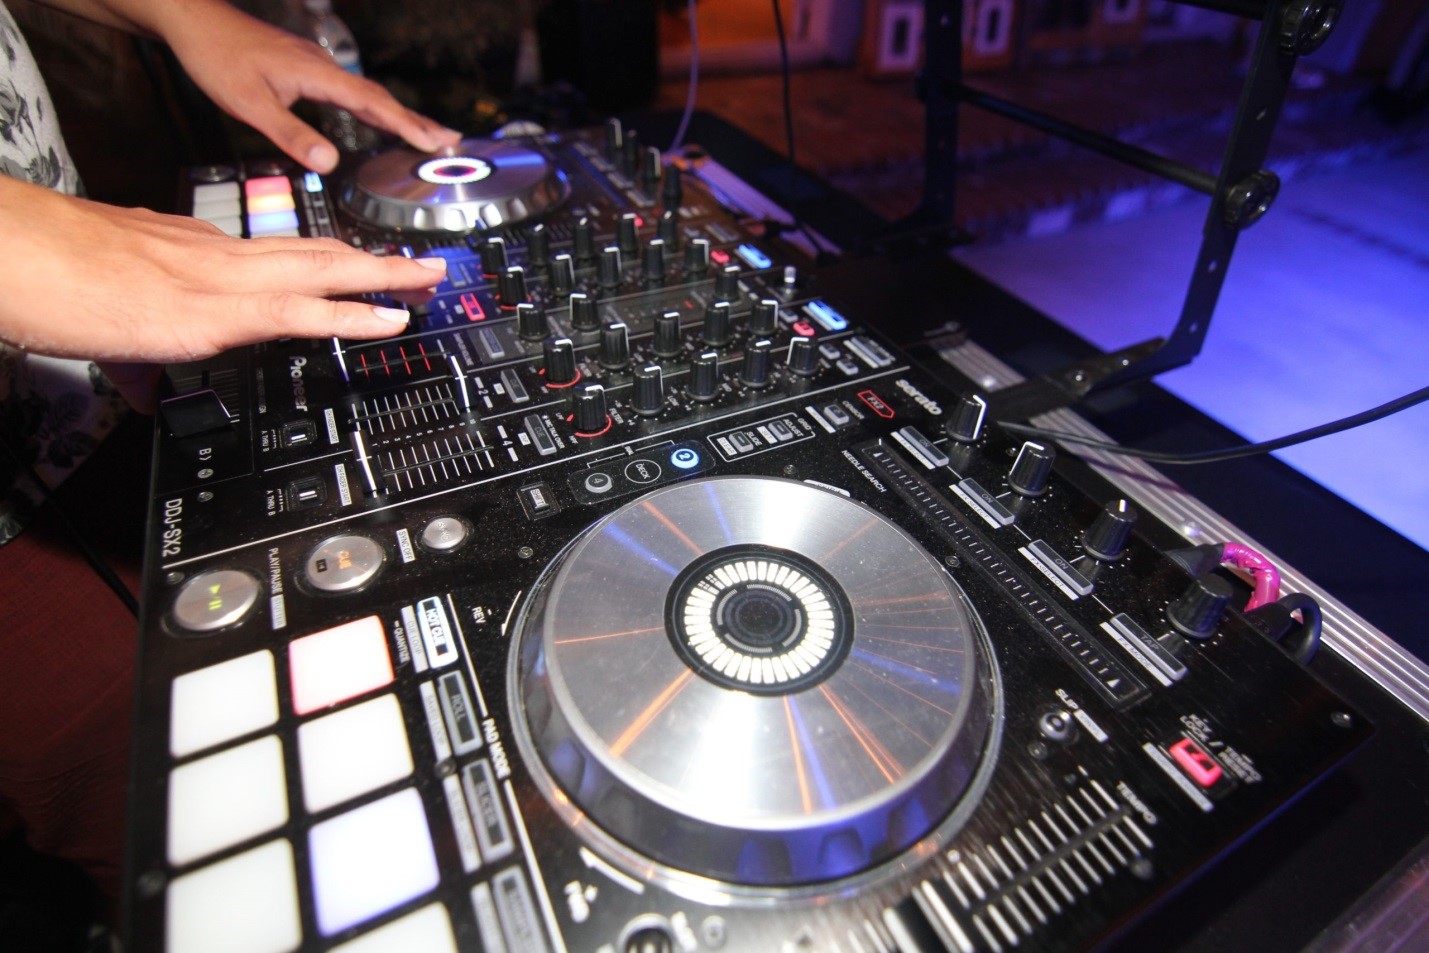 Behind the Decks: A Look into the World of Corporate DJs in Las Vegas